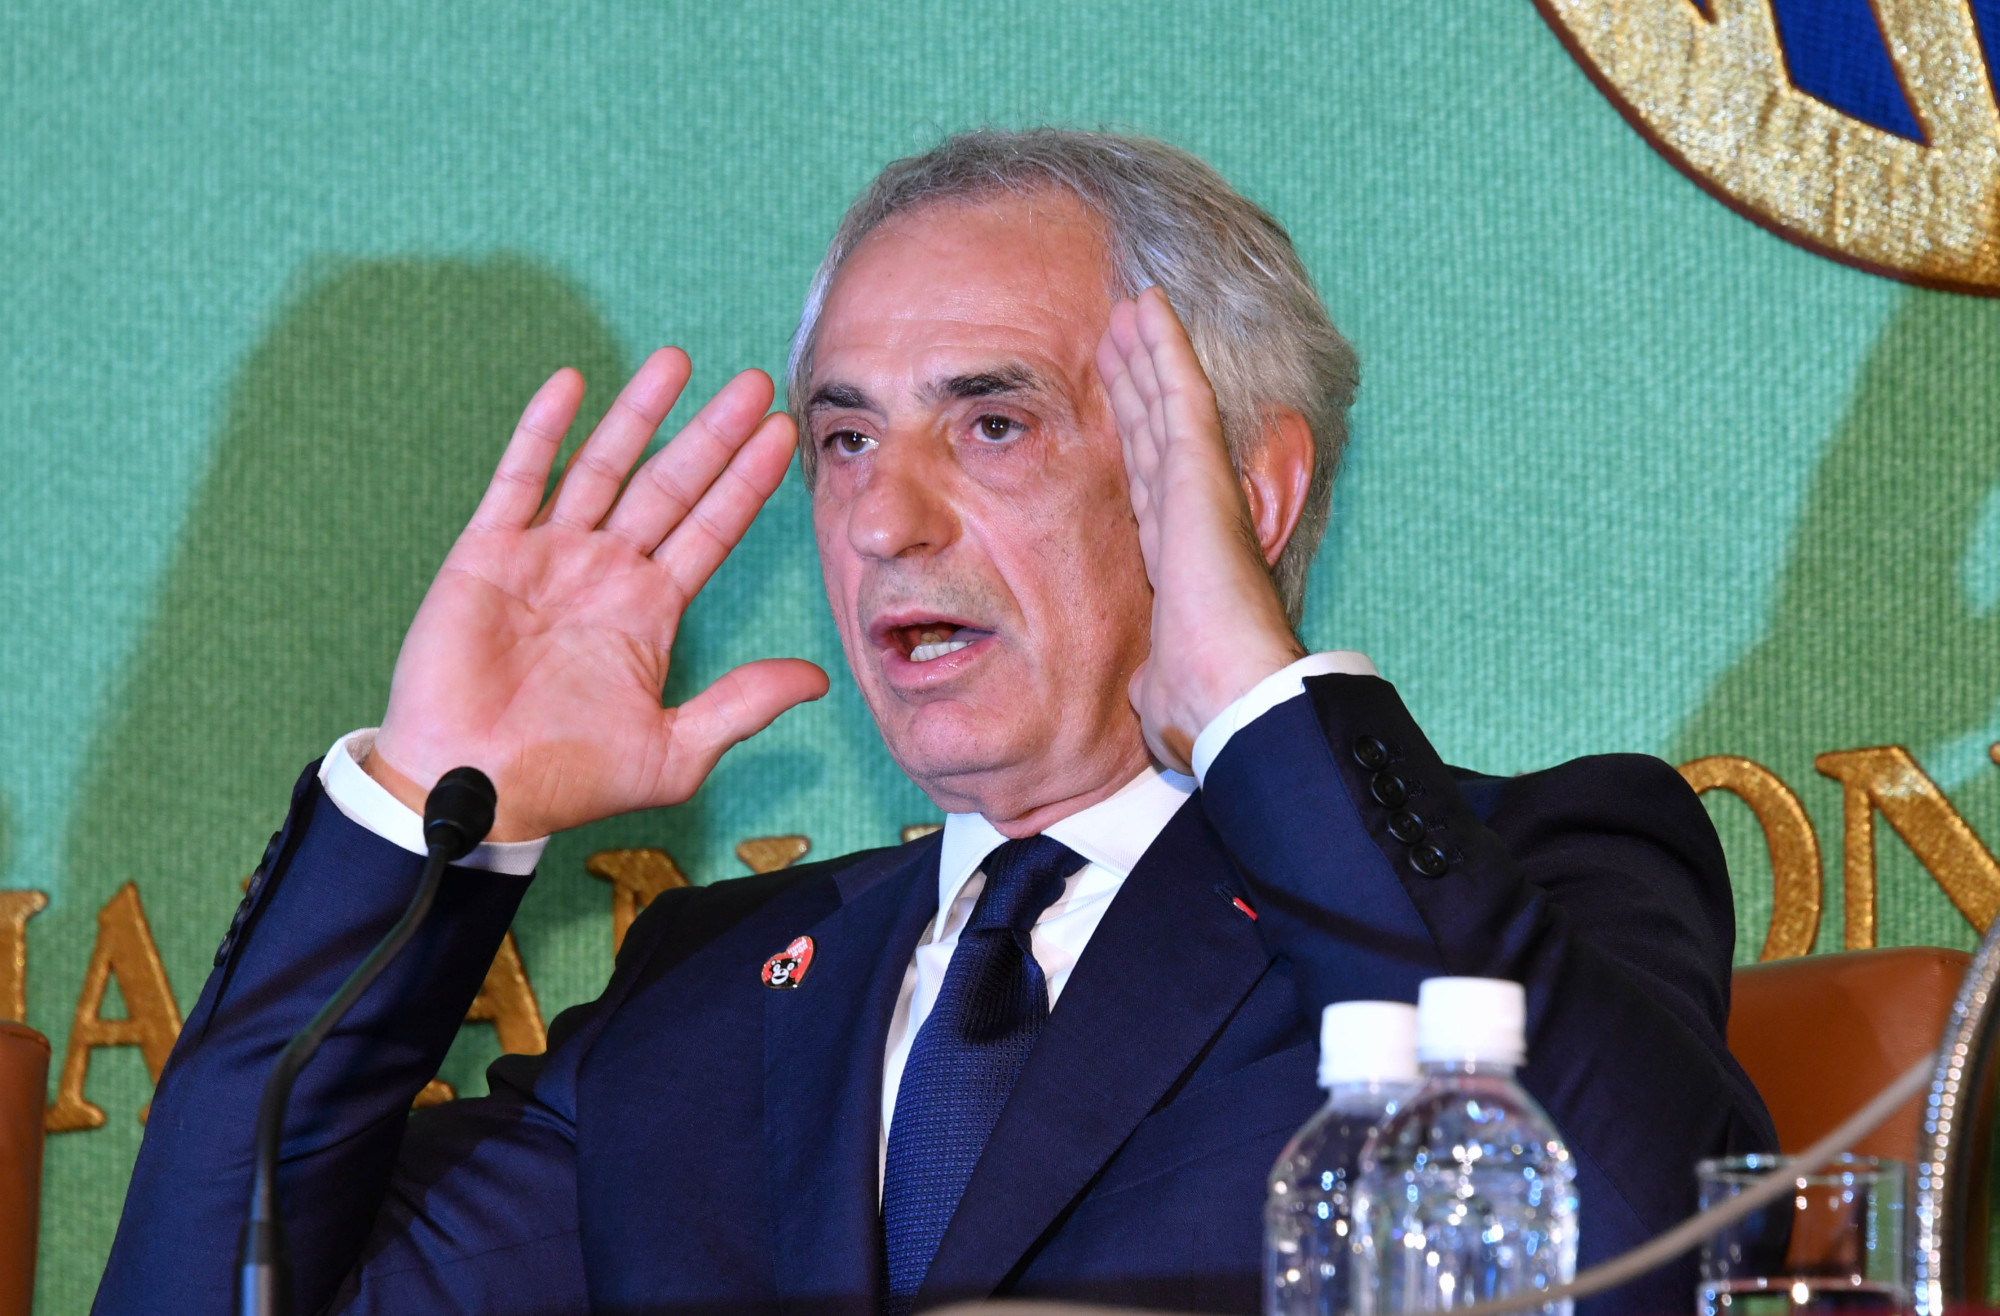 Vahid Halilhodzic speaks at a news conference in Tokyo on Friday about his dismissal as the coach of Japan's men's national soccer team. | YOSHIAKI MIURA